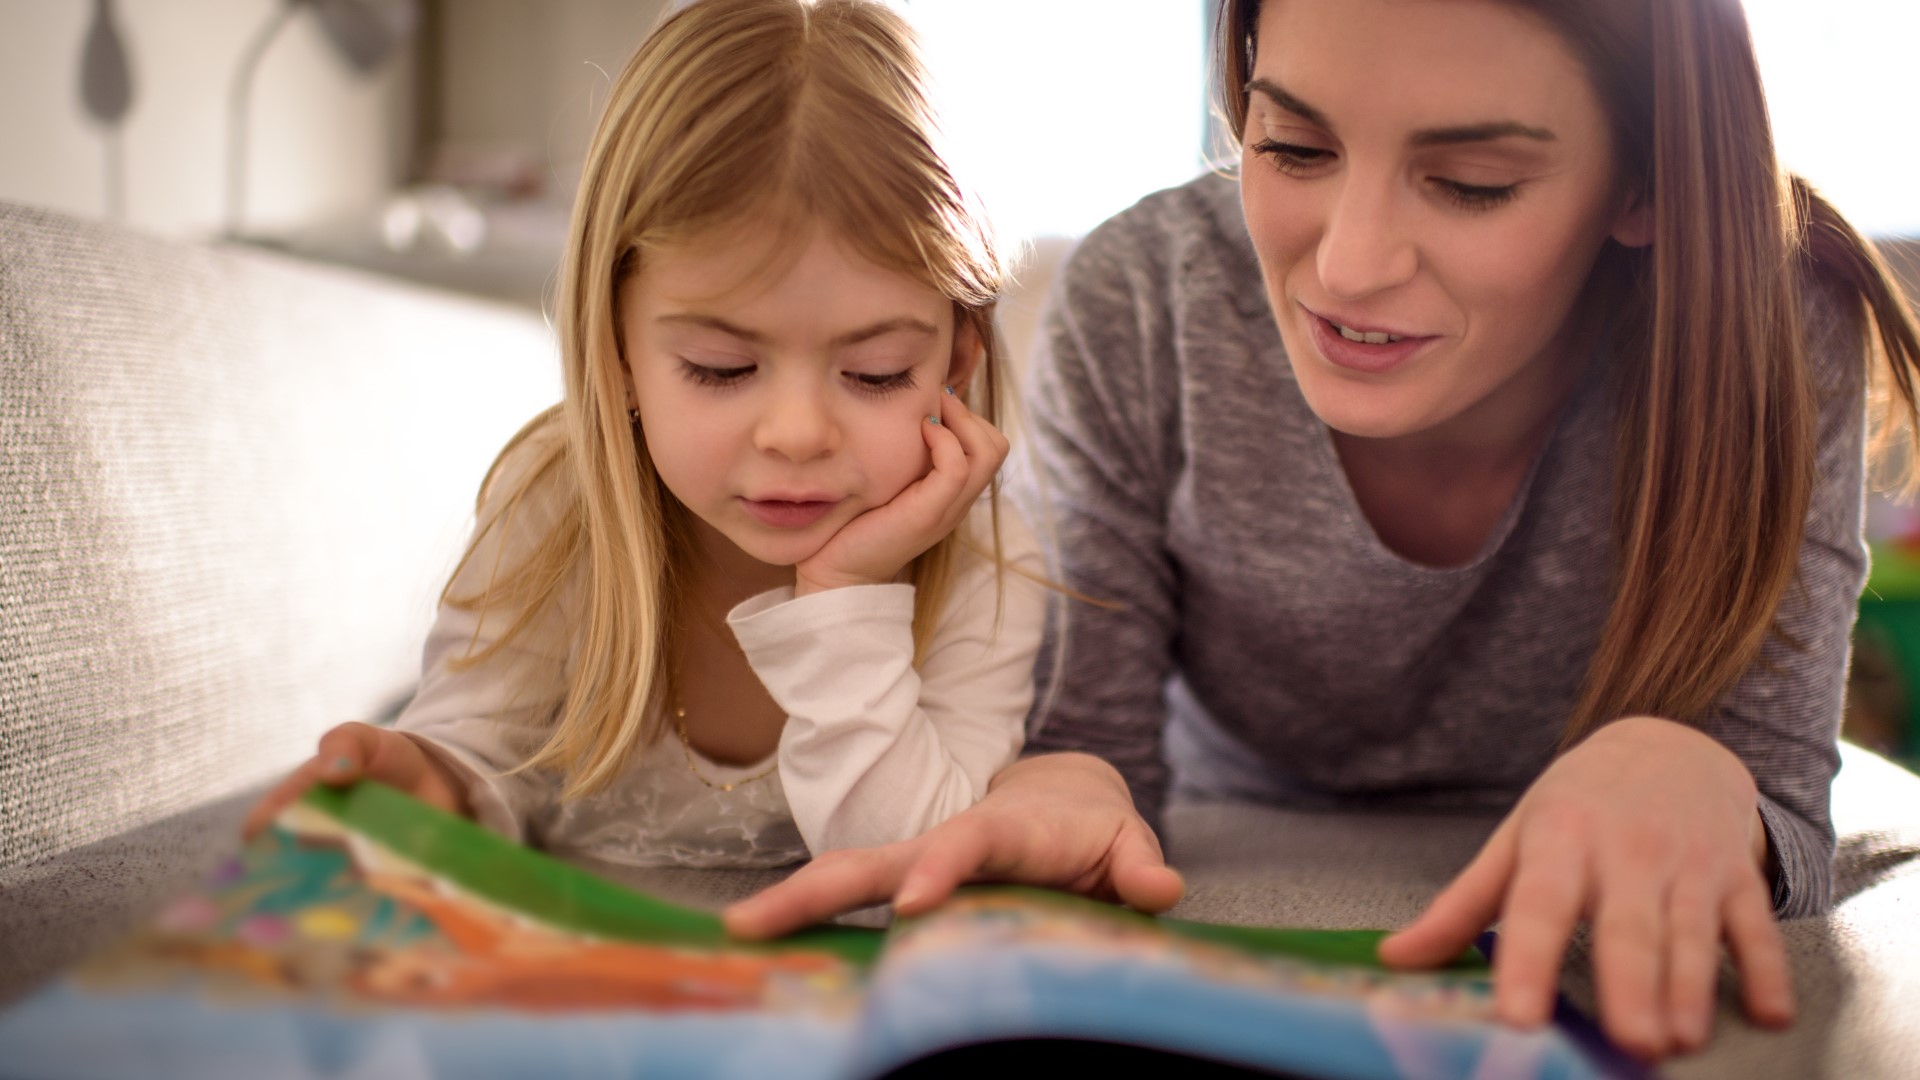 With many families looking for ways to engage their children during these uncertain times, the team at Schuler Books created a reading program to pass the time!